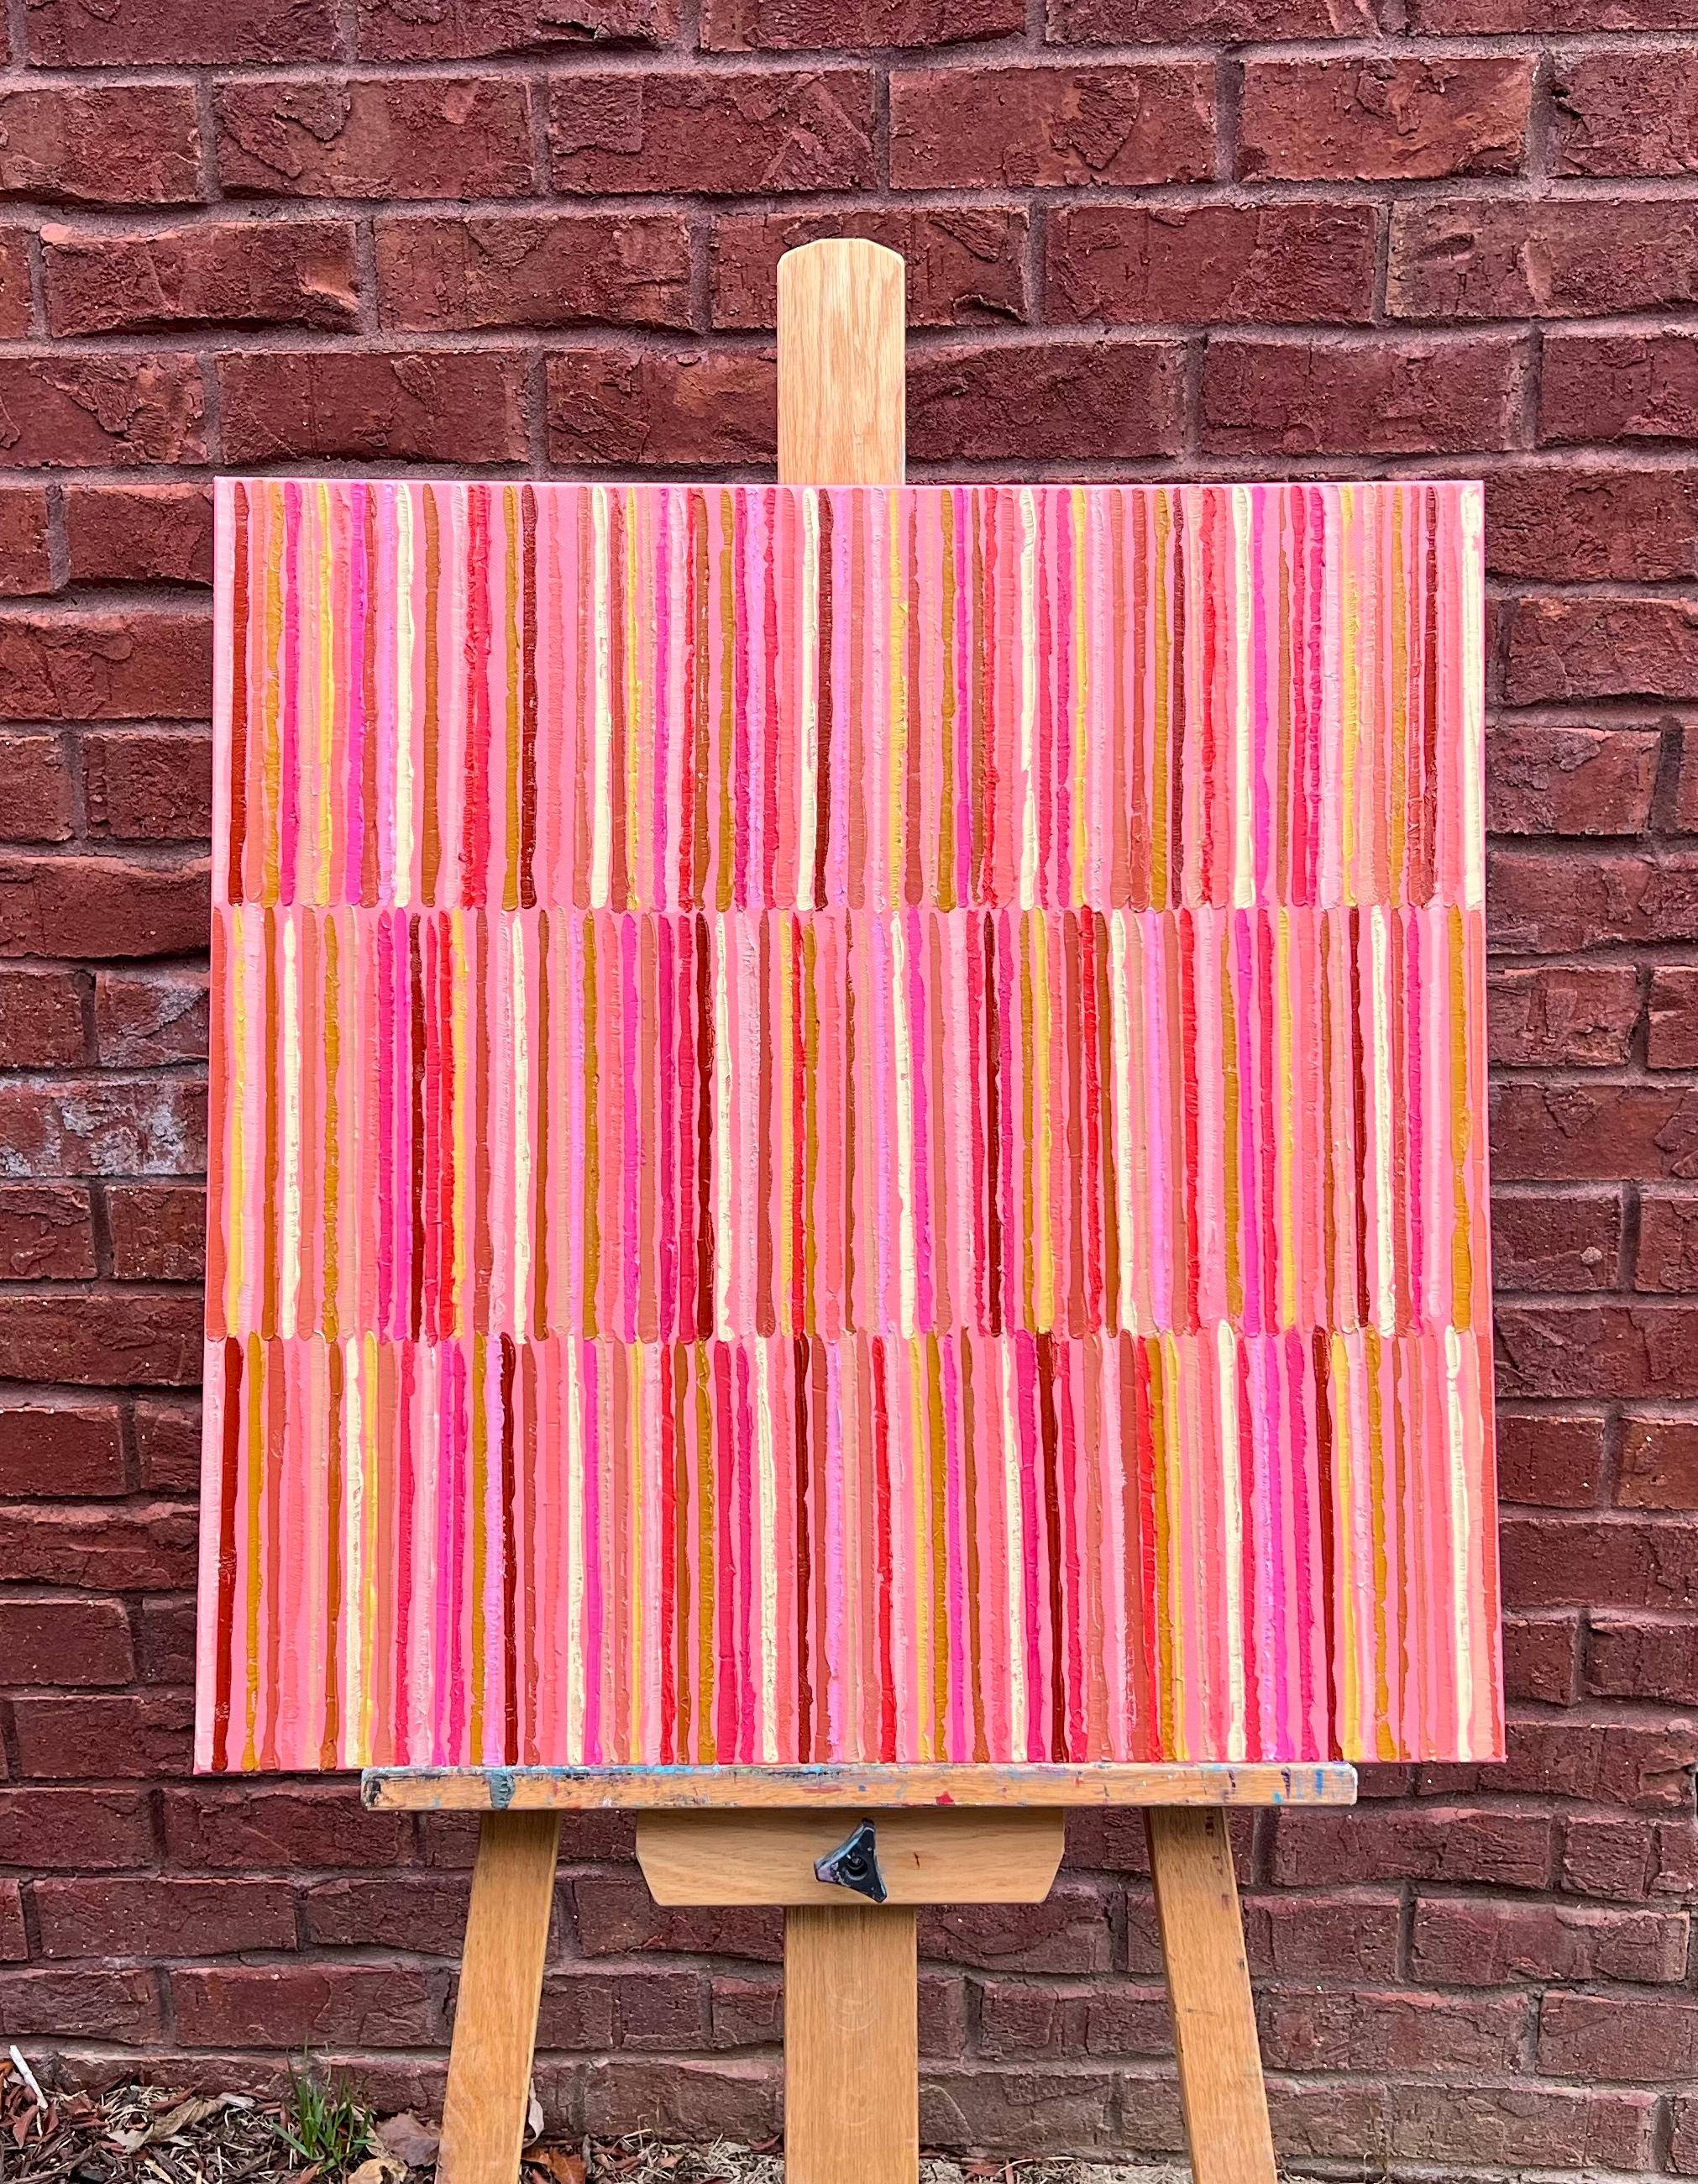 <p>Artist Comments<br>A radiant palette of vivid pink hues creates a striking geometric abstract in artist Janet Hamilton's piece. She arranges vibrant vertical lines in cascading patterns with expressive color and texture. 